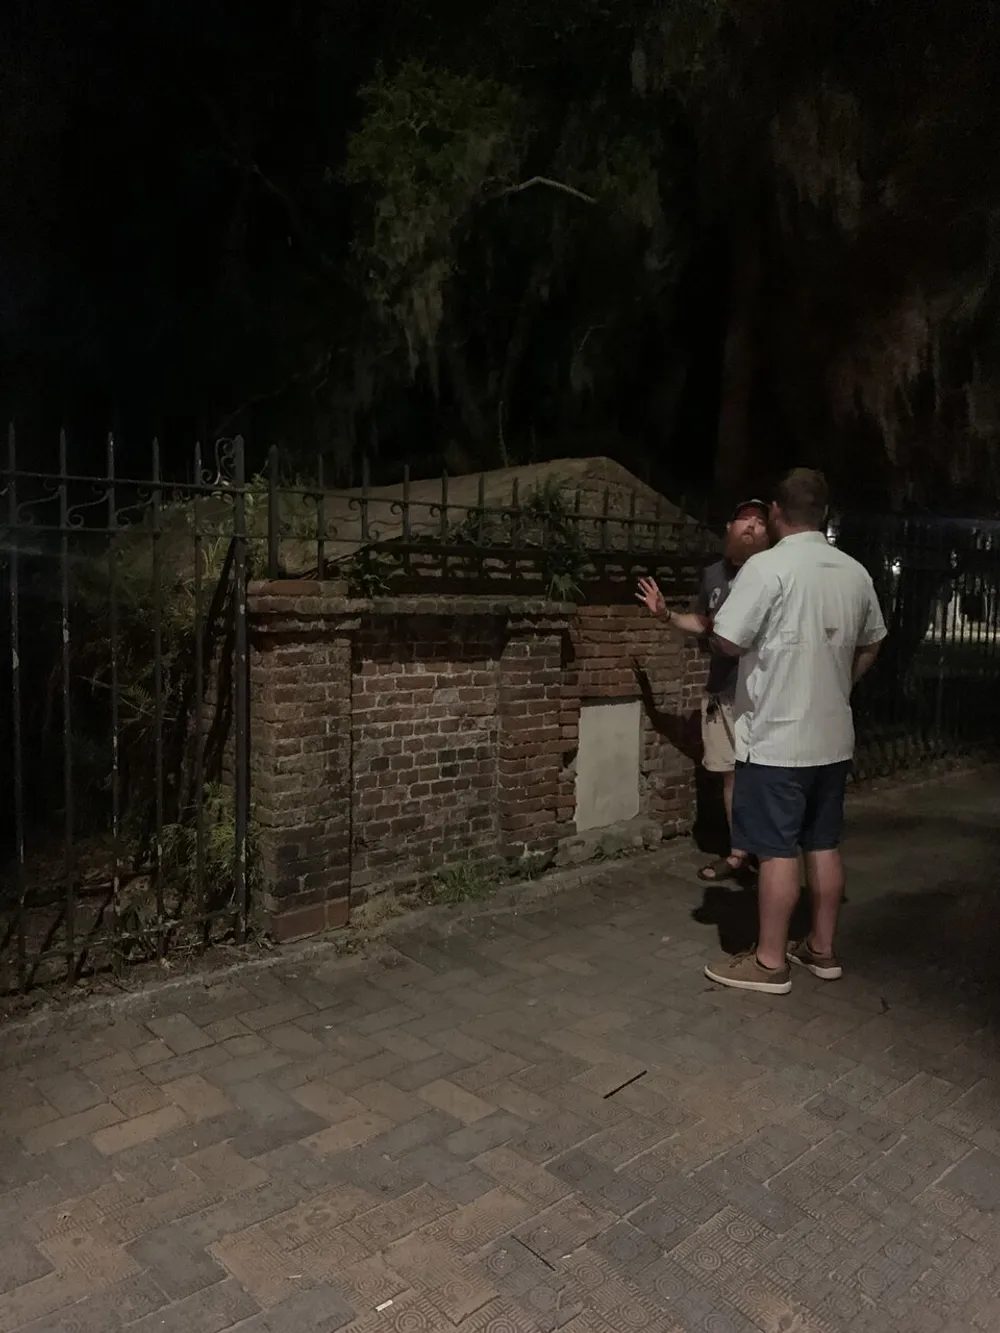 Two individuals are standing at night by a brick structure with overhanging Spanish moss seemingly in a discussion or examination of the place